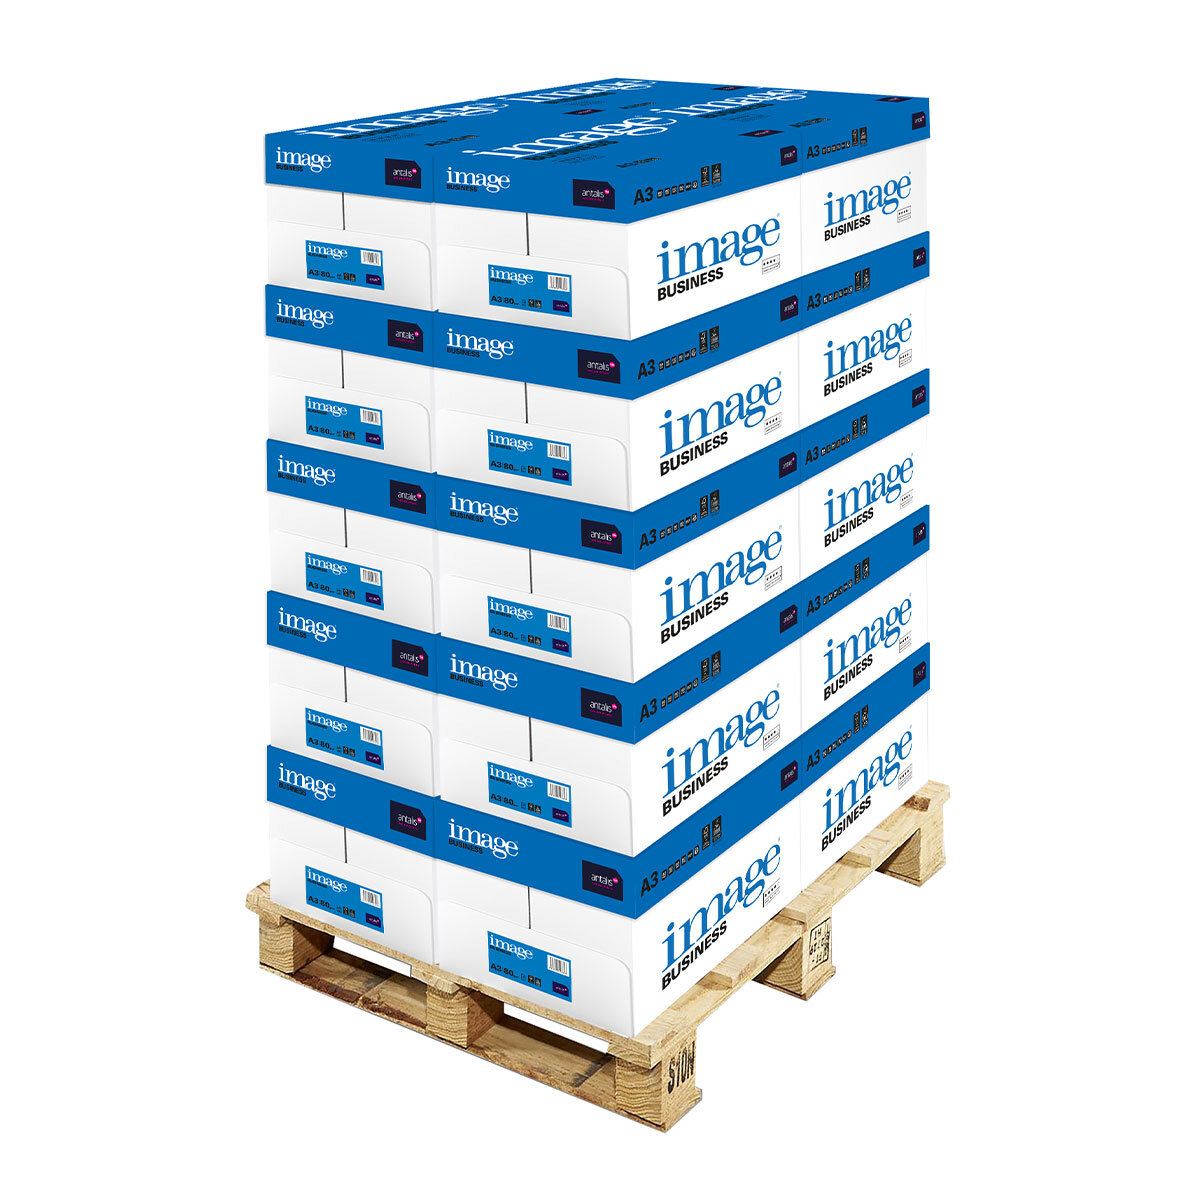 Buy Image Business A3 Pallet of Paper Image at Costco.co.uk